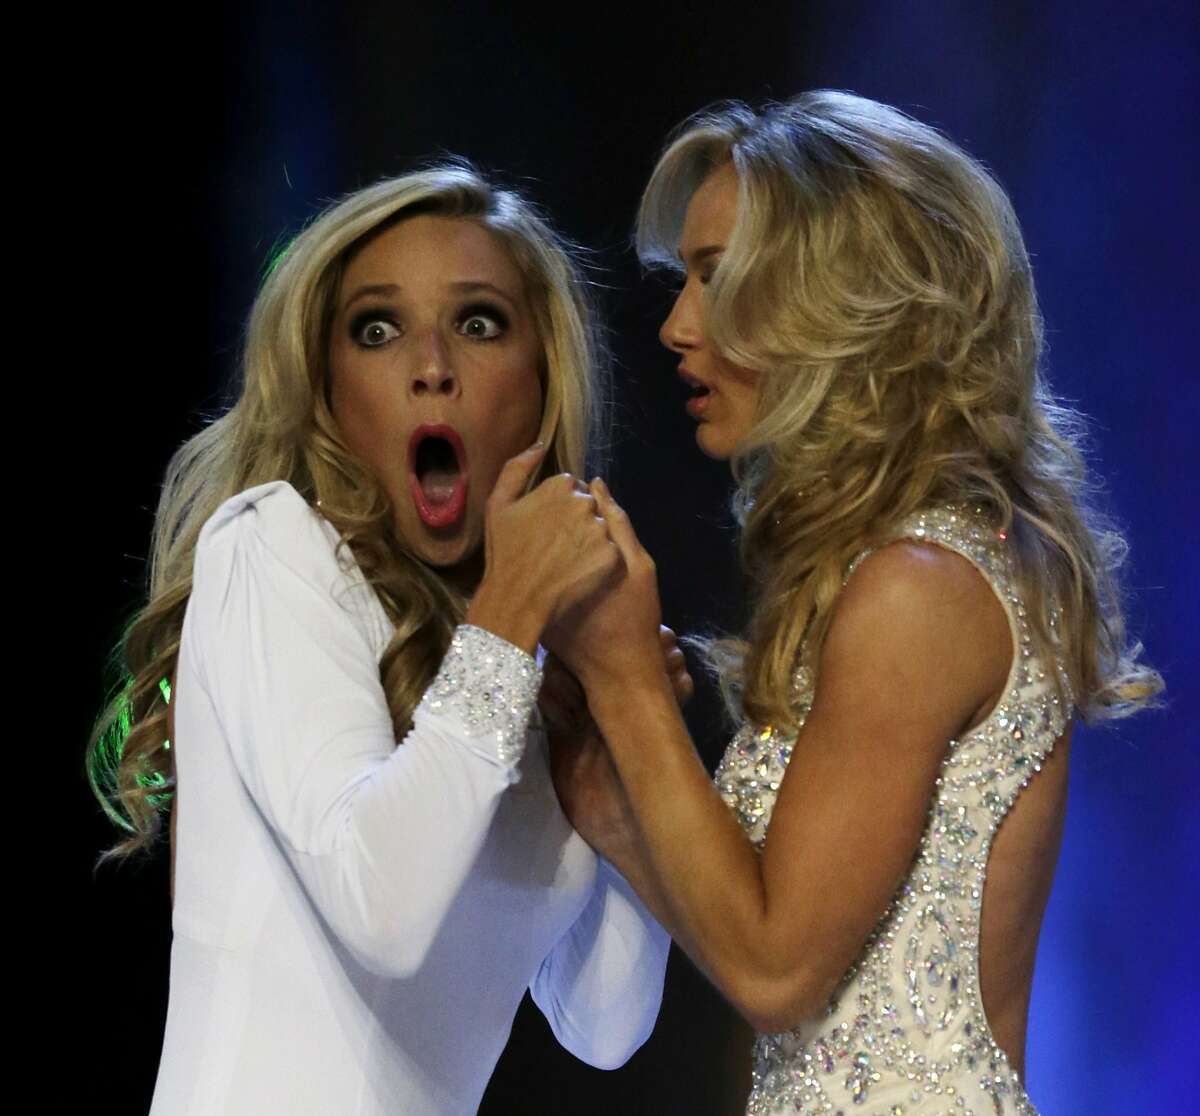 Miss New York Kira Kazantsev, left, gasps after she was named Miss America 2015 as she holds hands with Miss Virginia Courtney Paige Garrett during the Miss America 2015 pageant, Sunday, Sept. 14, 2014, in Atlantic City, N.J. (AP Photo/Julio Cortez)